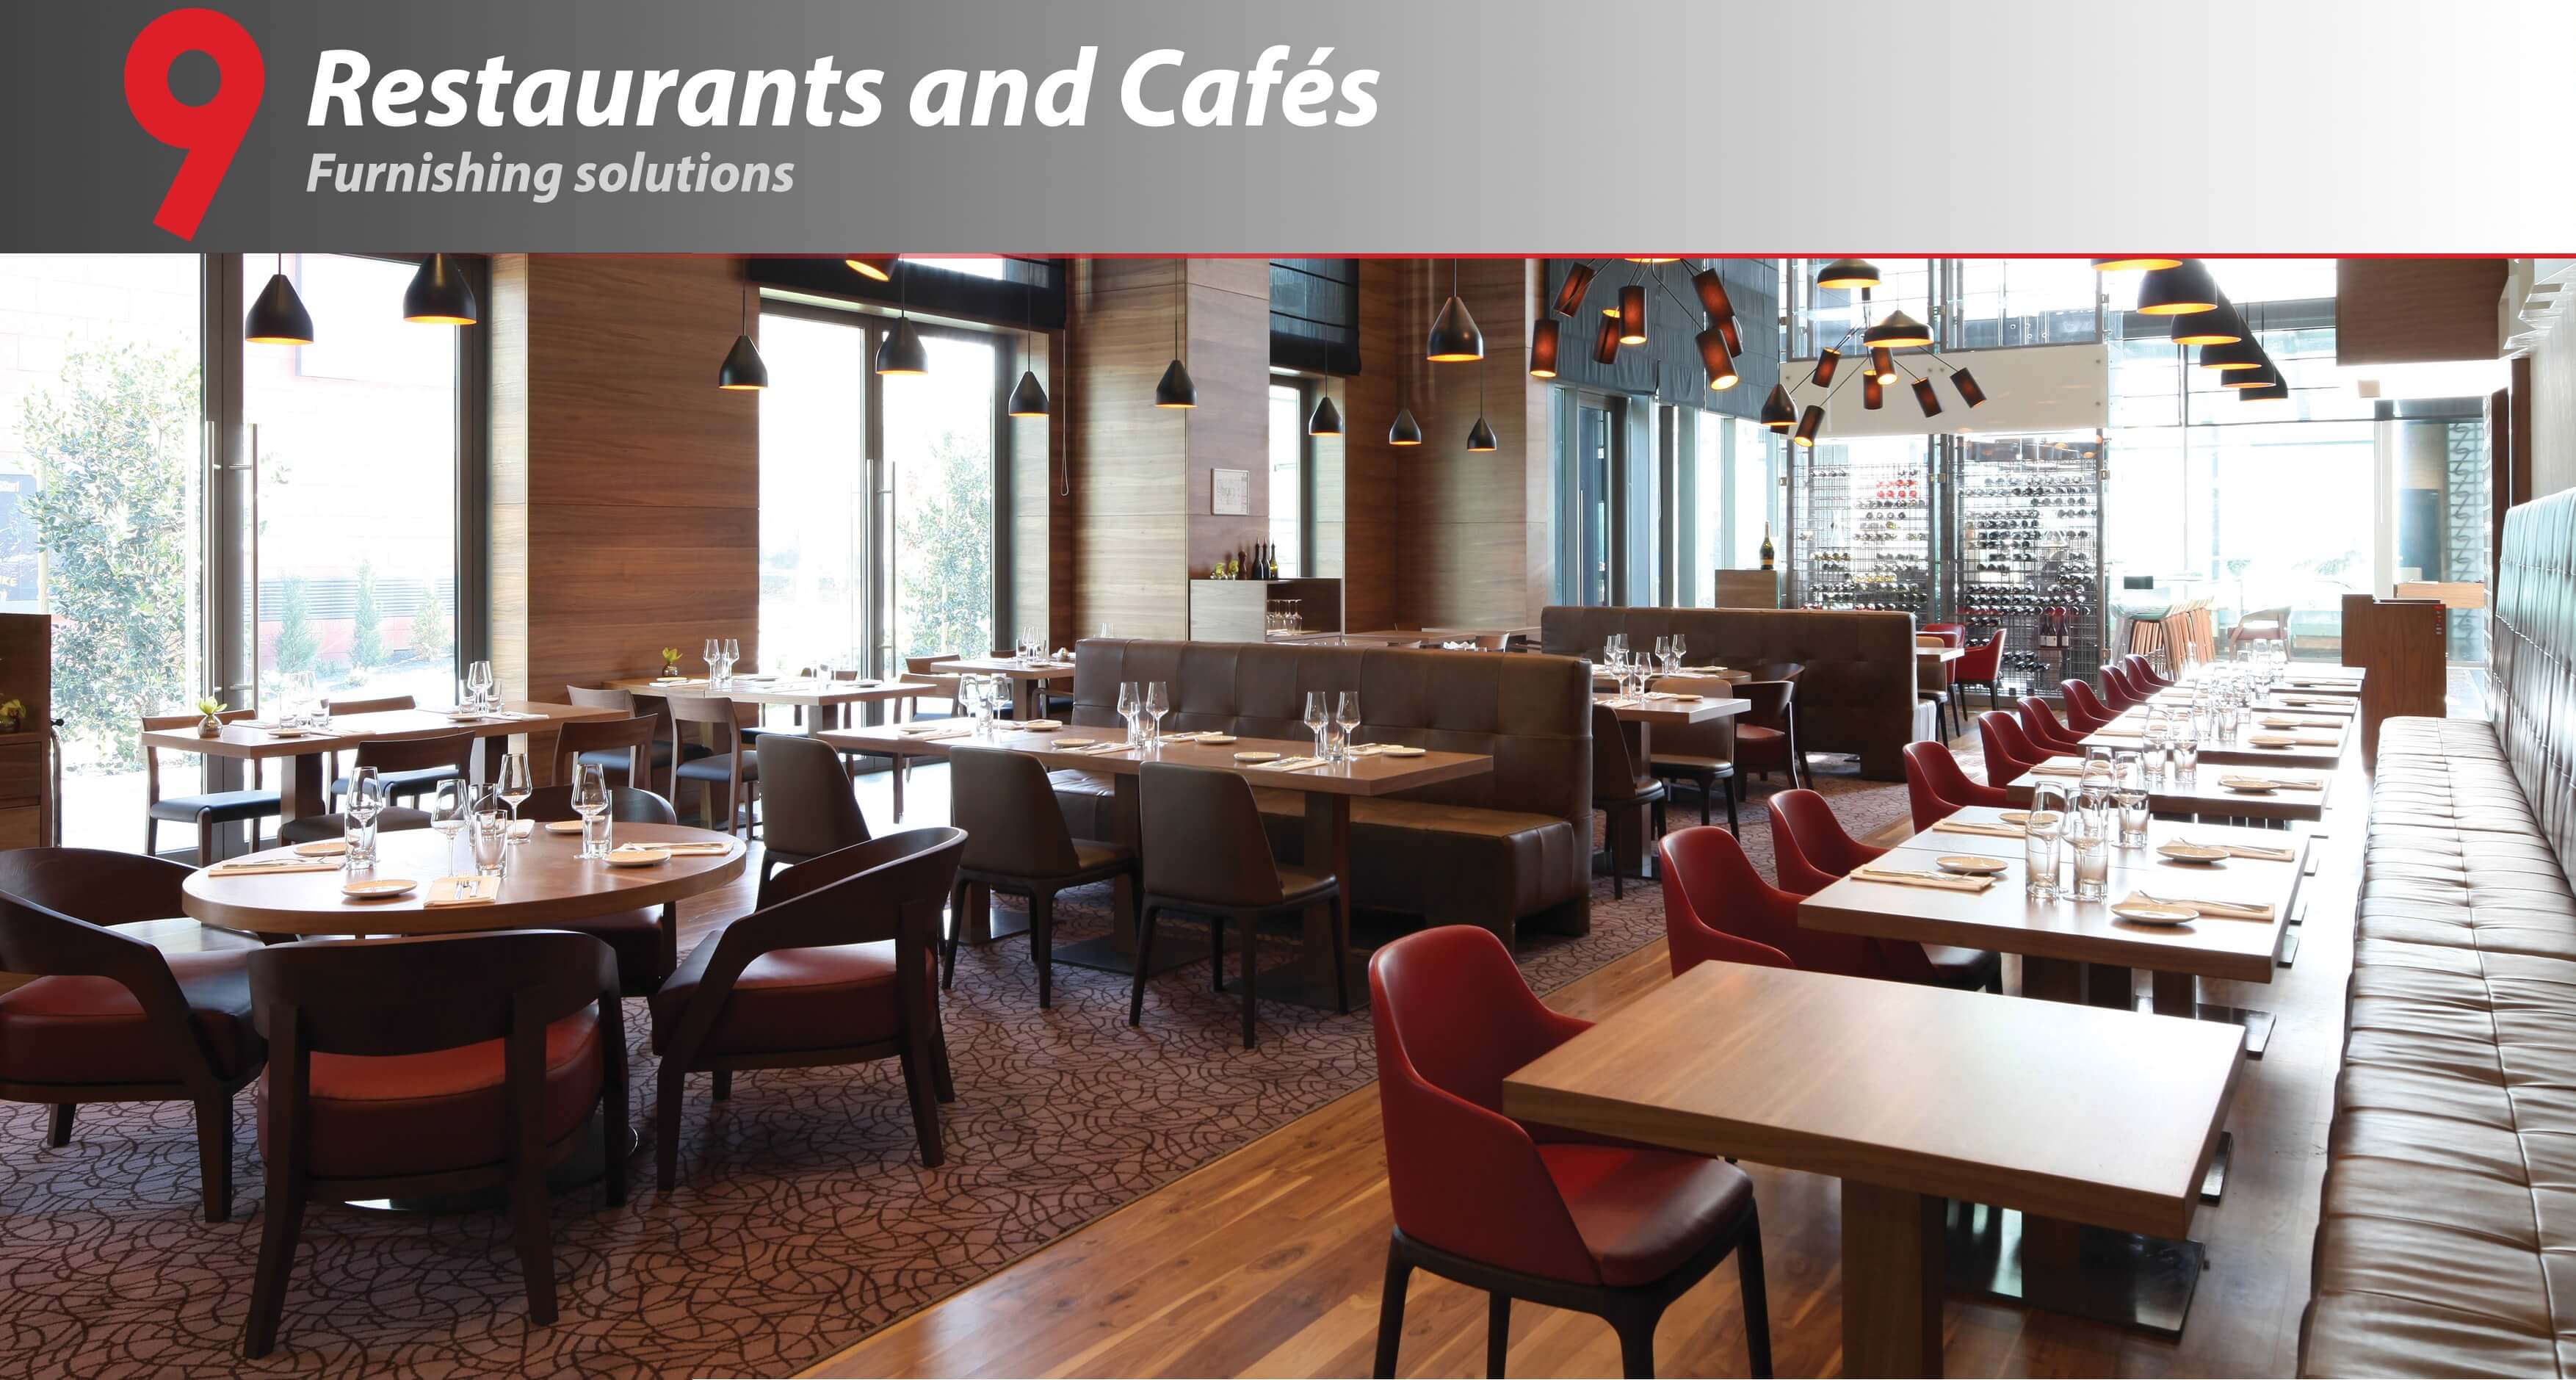 Restaurants and Cafes